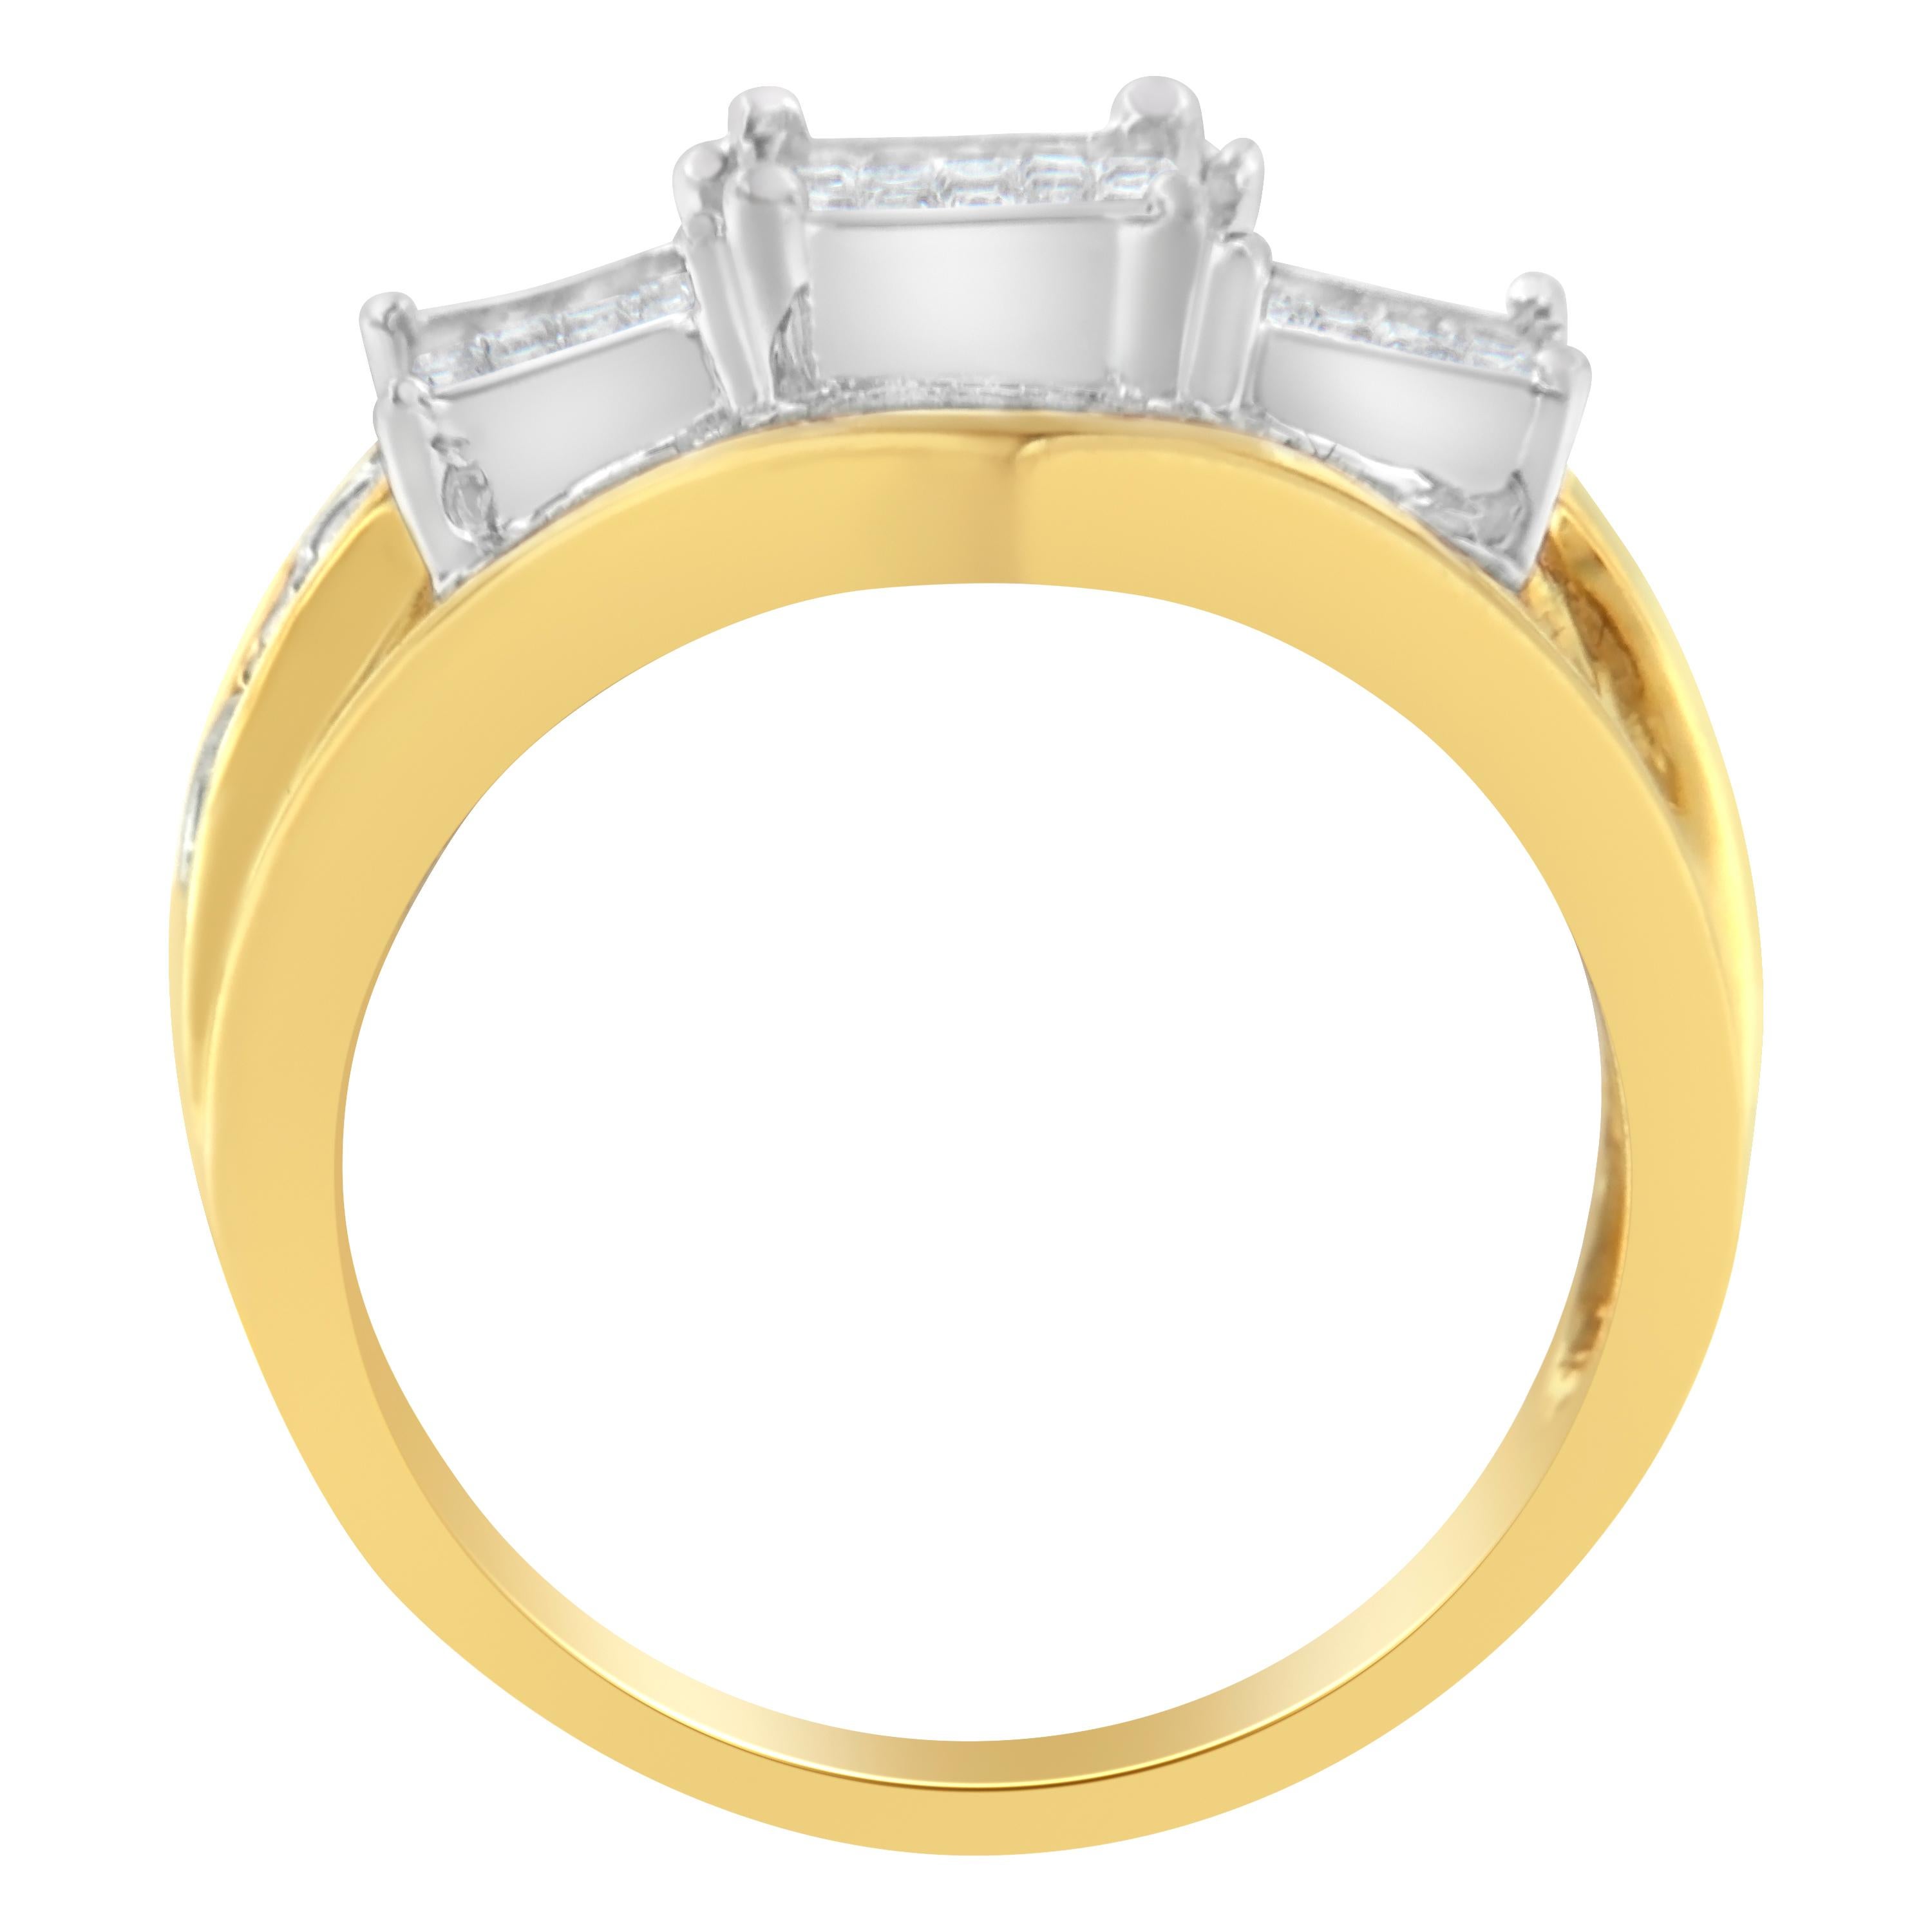 Contemporary 10K Two-Toned Gold 1.0 Carat Diamond Ring For Sale